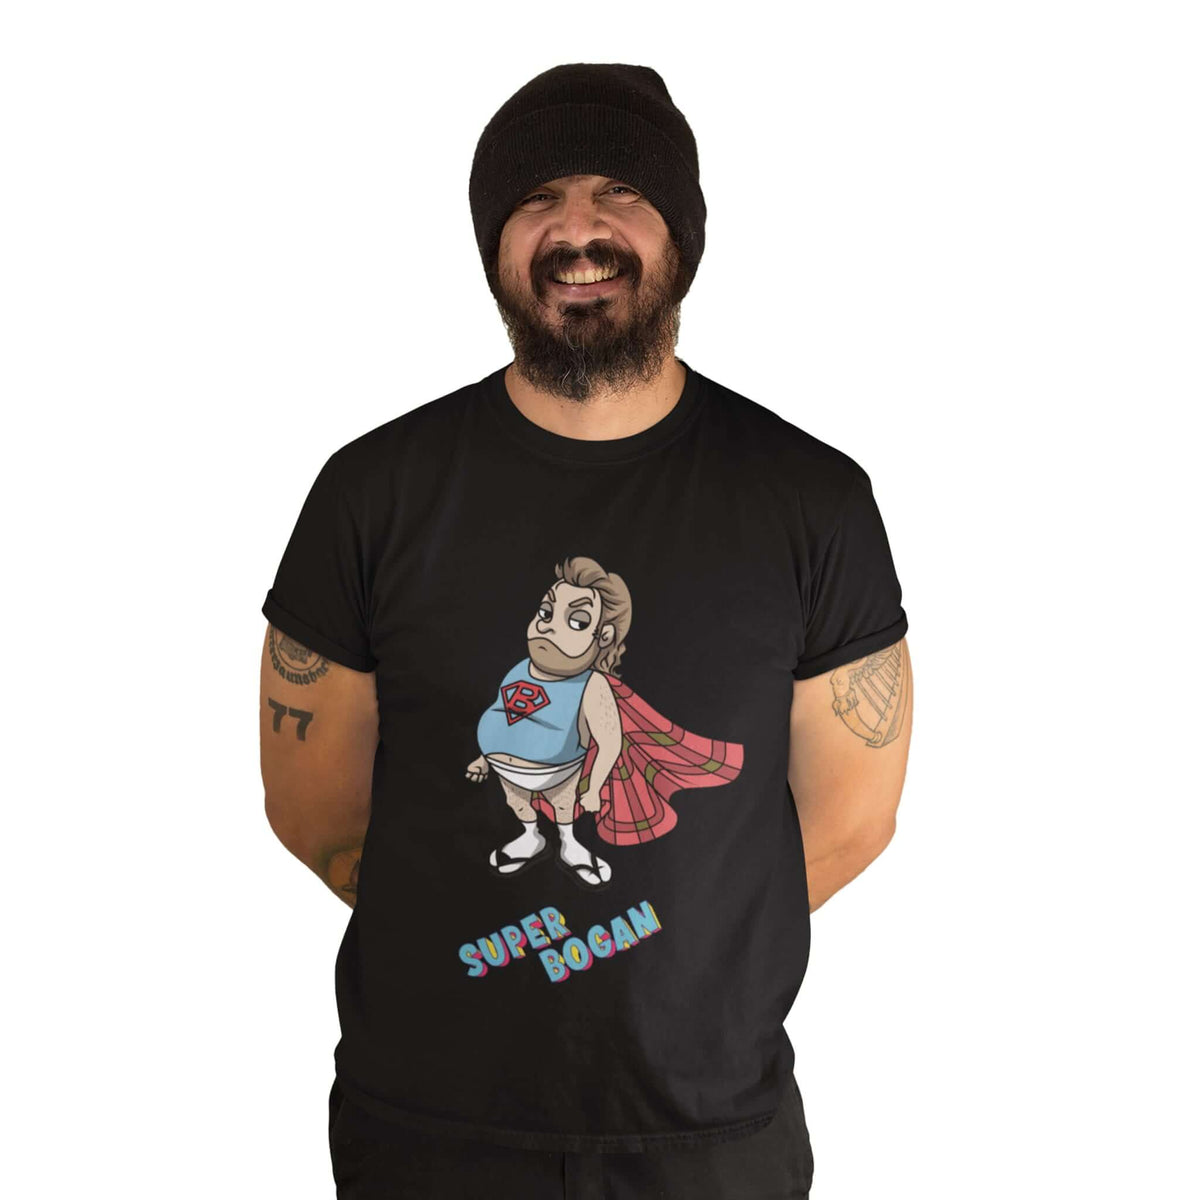 bearded guy wearing black t shirt with Super Bogan character design